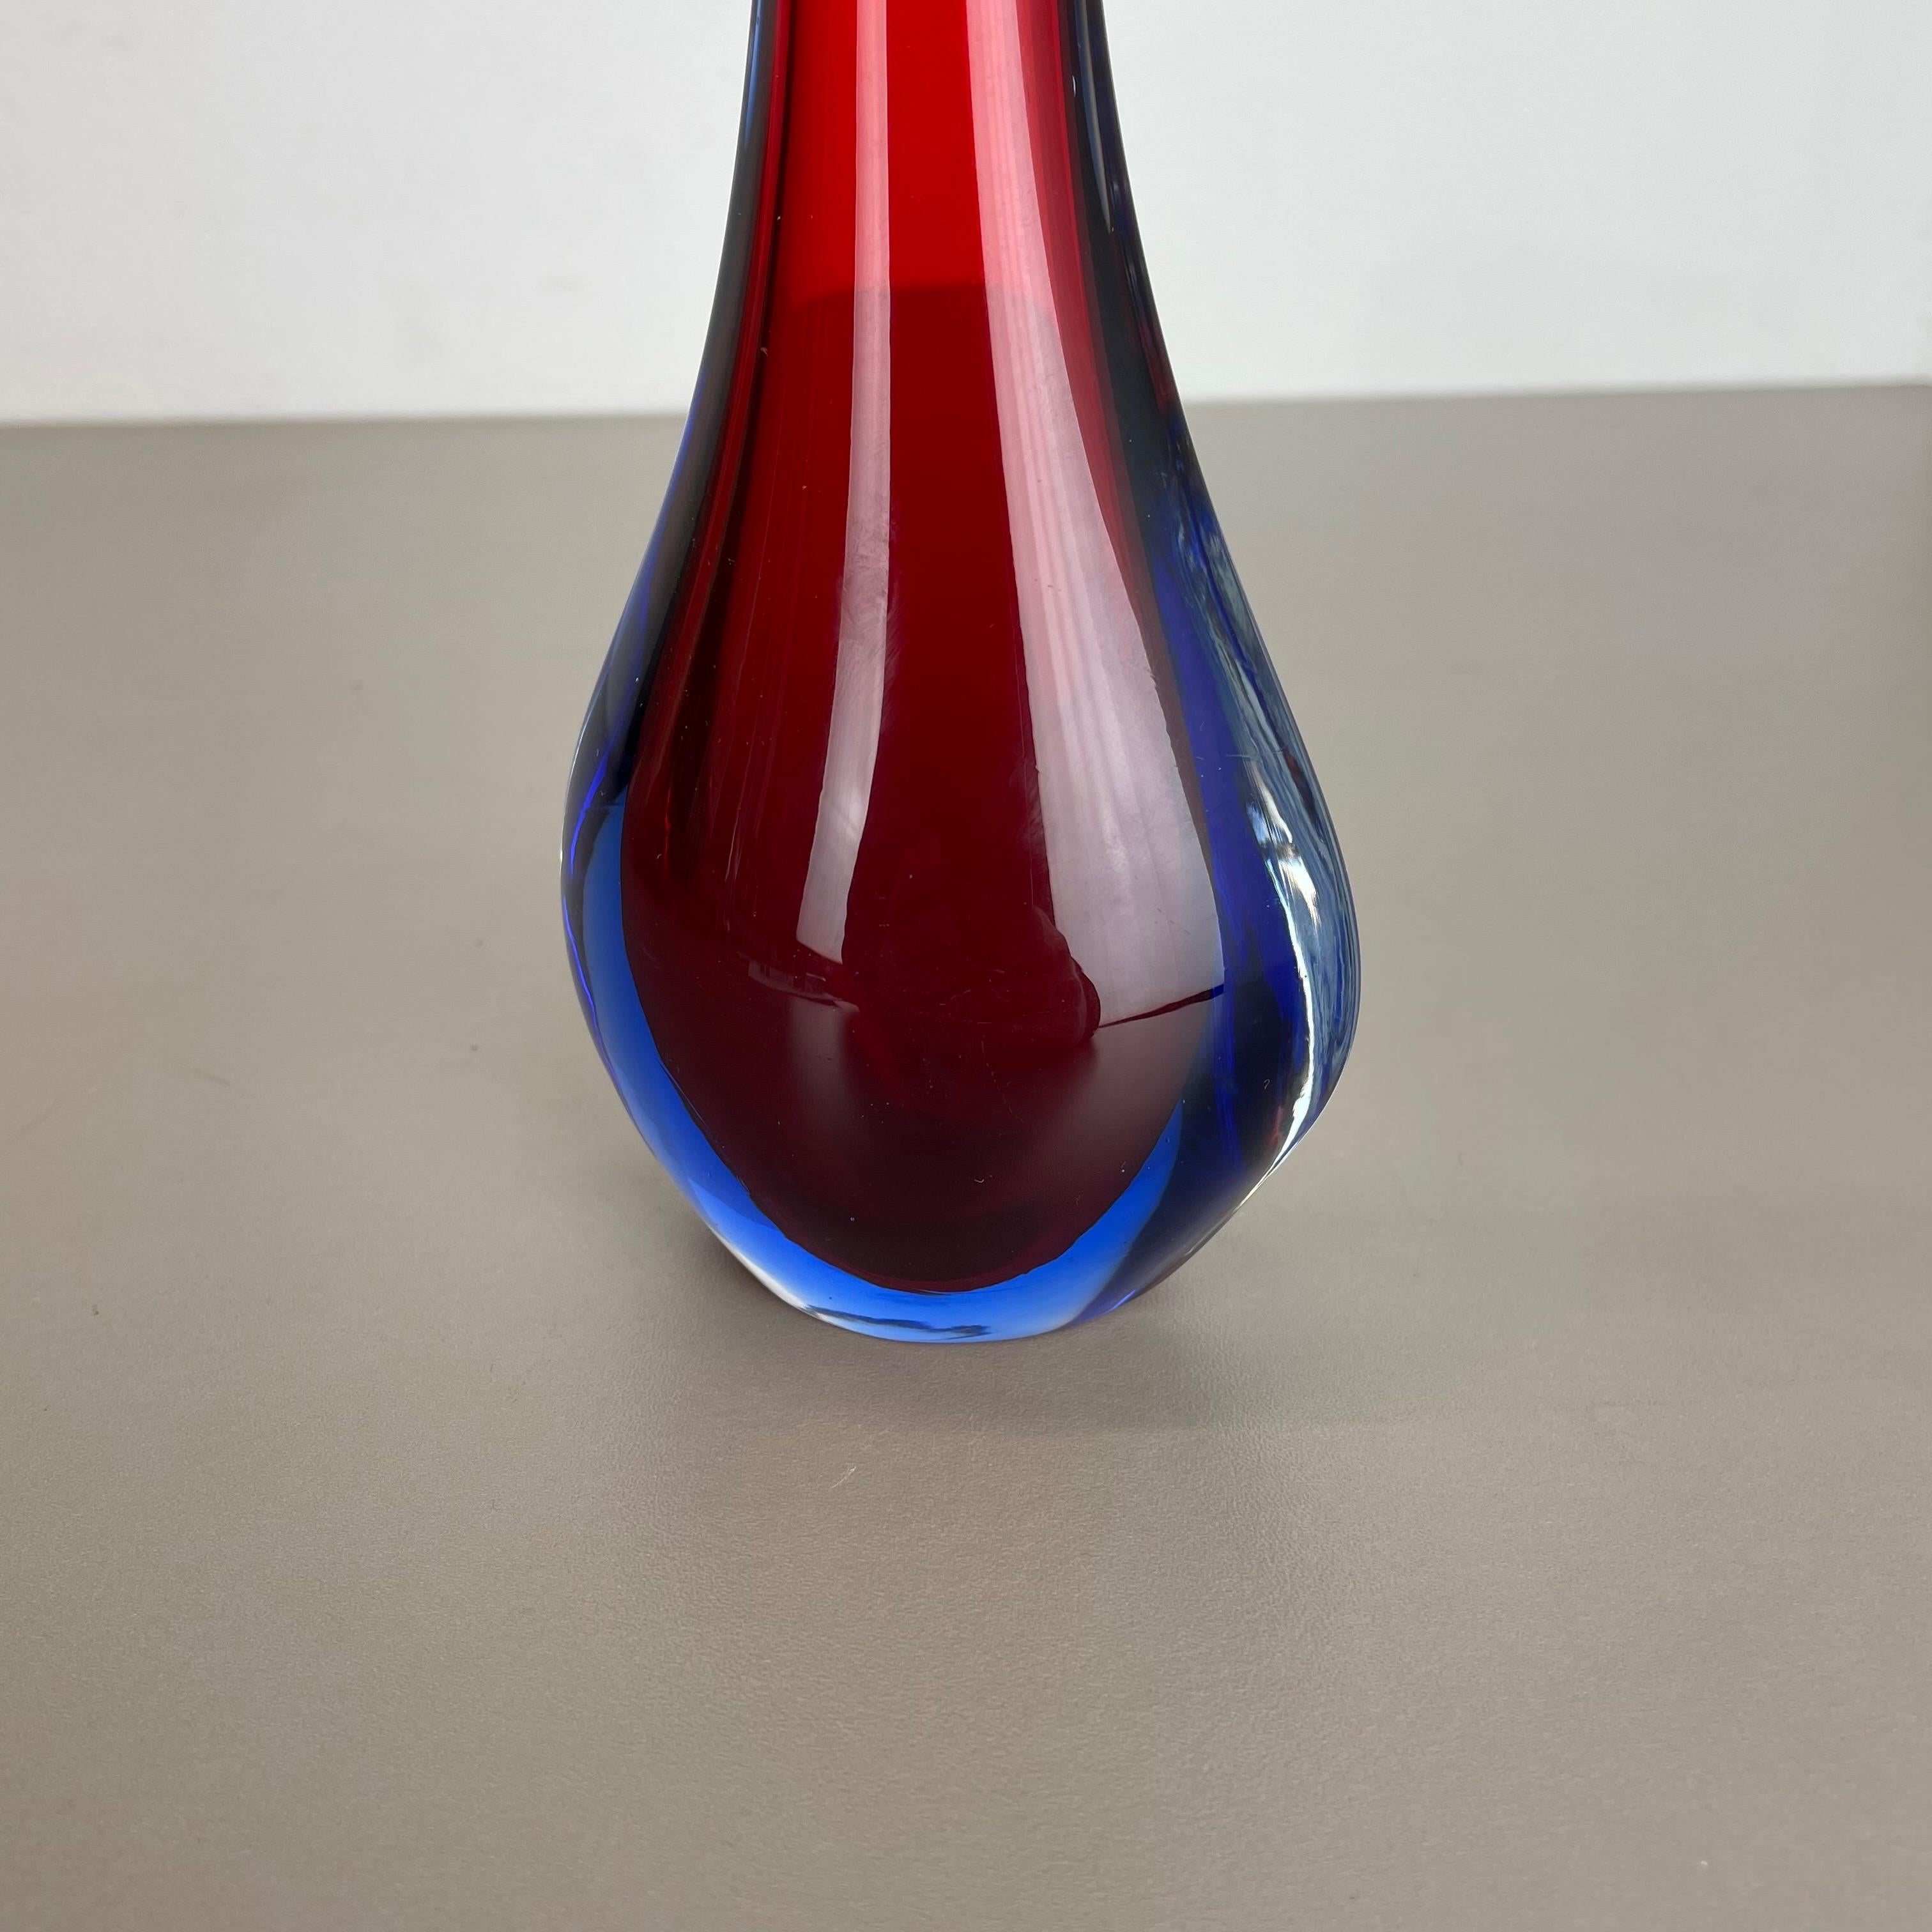 Large 1960s Murano Glass Sommerso 29cm Single-Stem Vase by Flavio Poli, Italy In Good Condition For Sale In Kirchlengern, DE